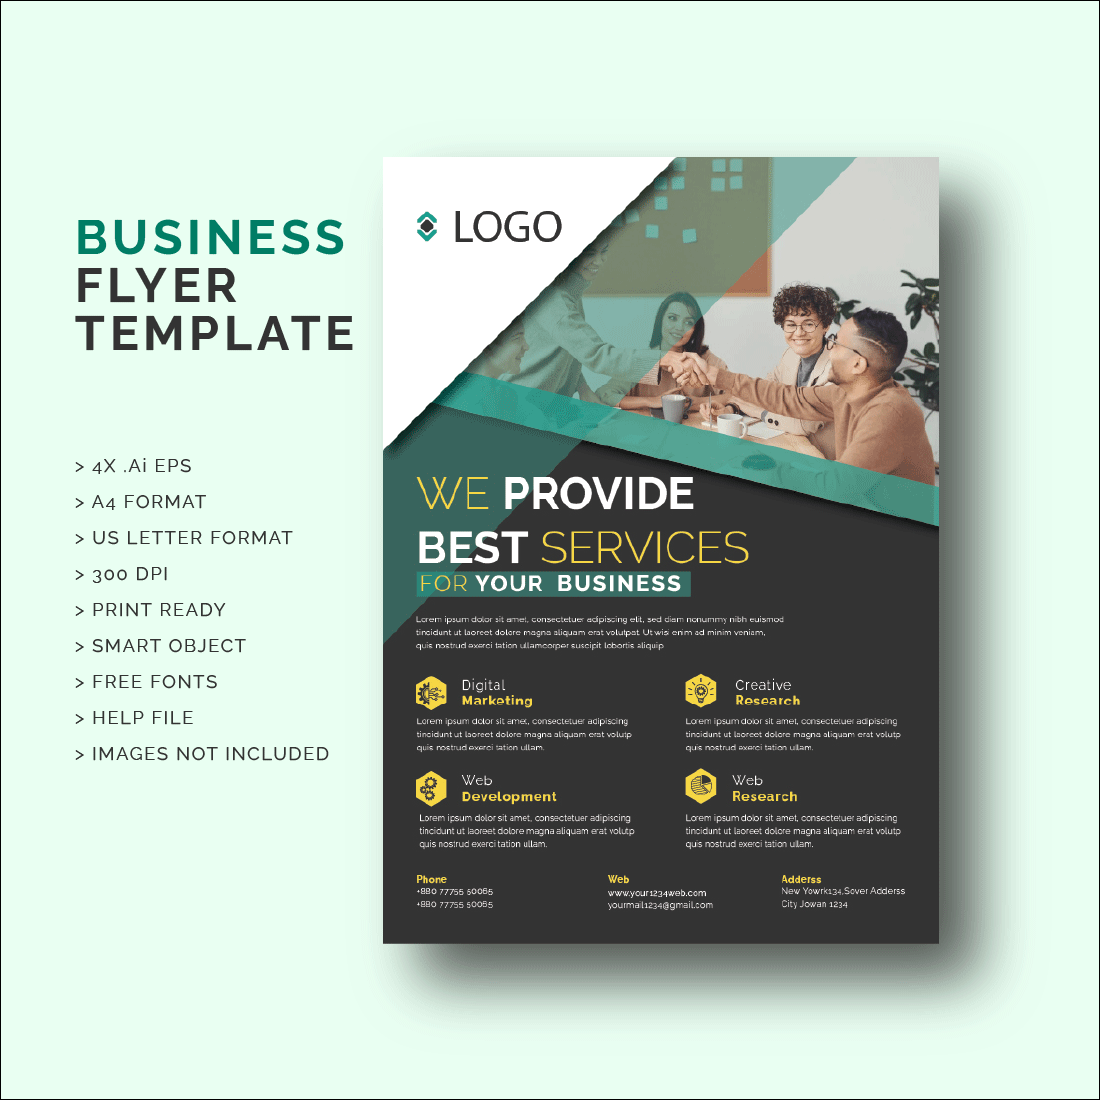 Business Flyer Template Cover Image.